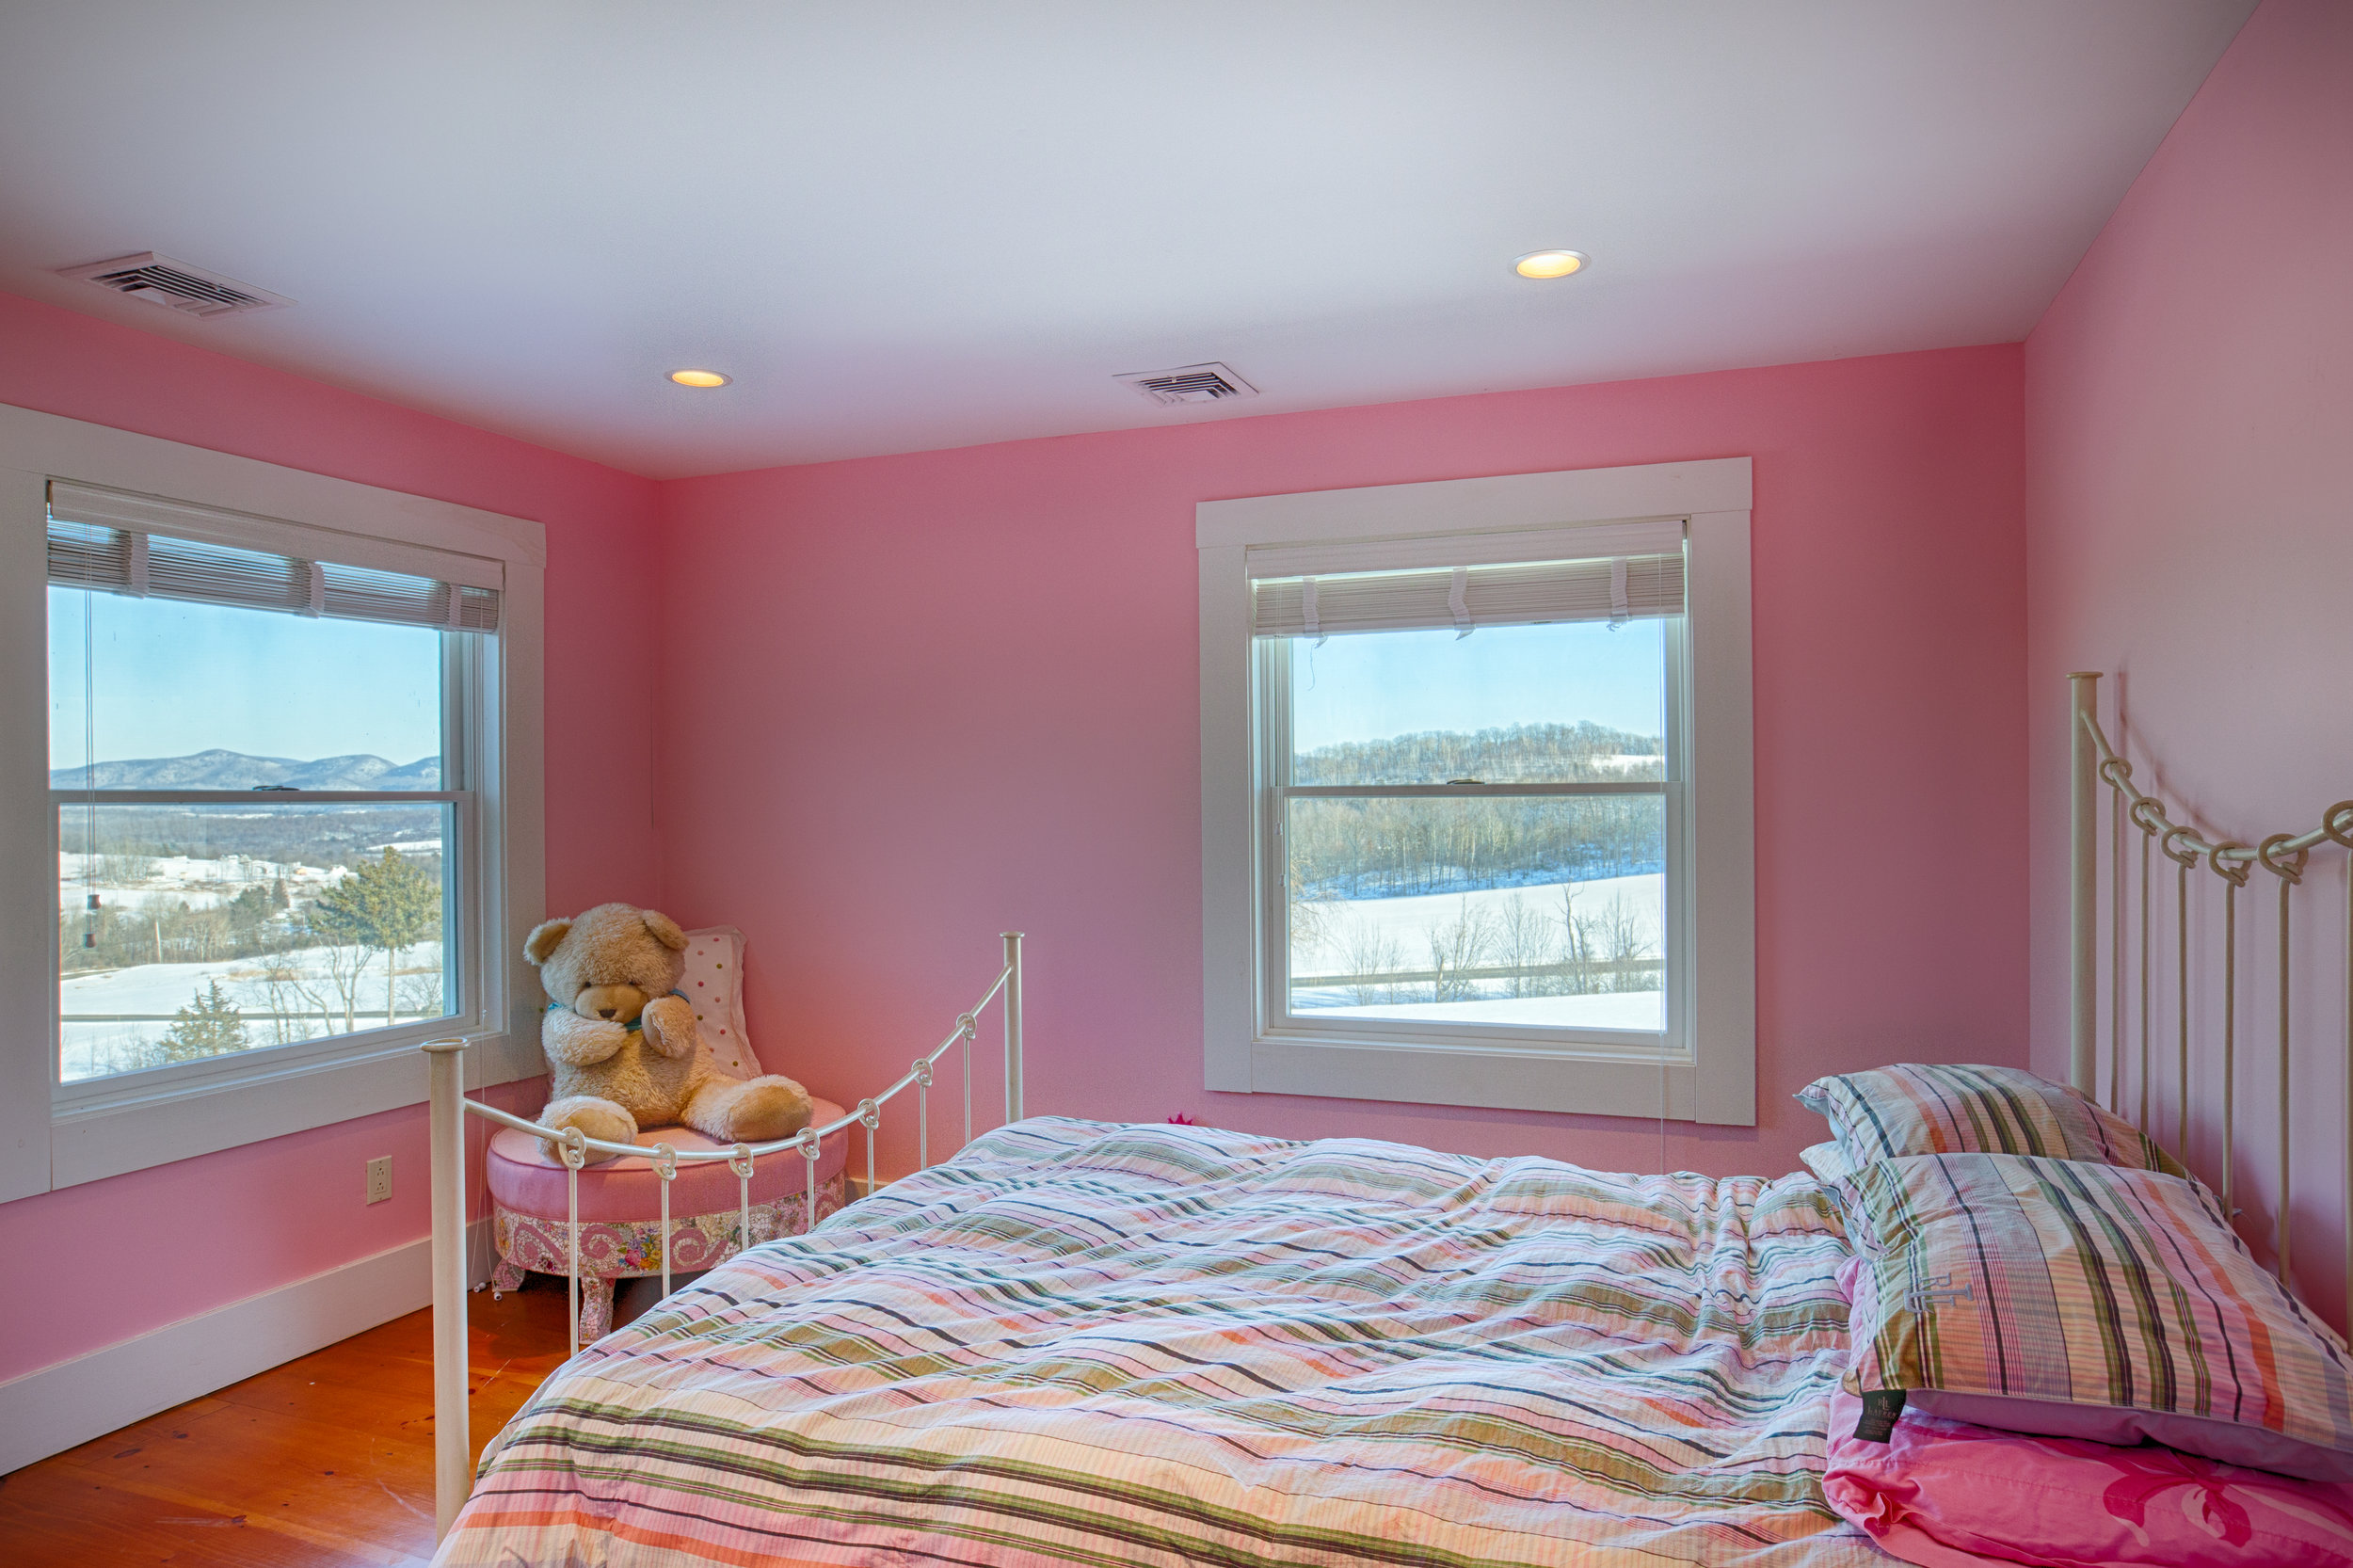  Bedroom with pink walls and white and pink striped comforter.  